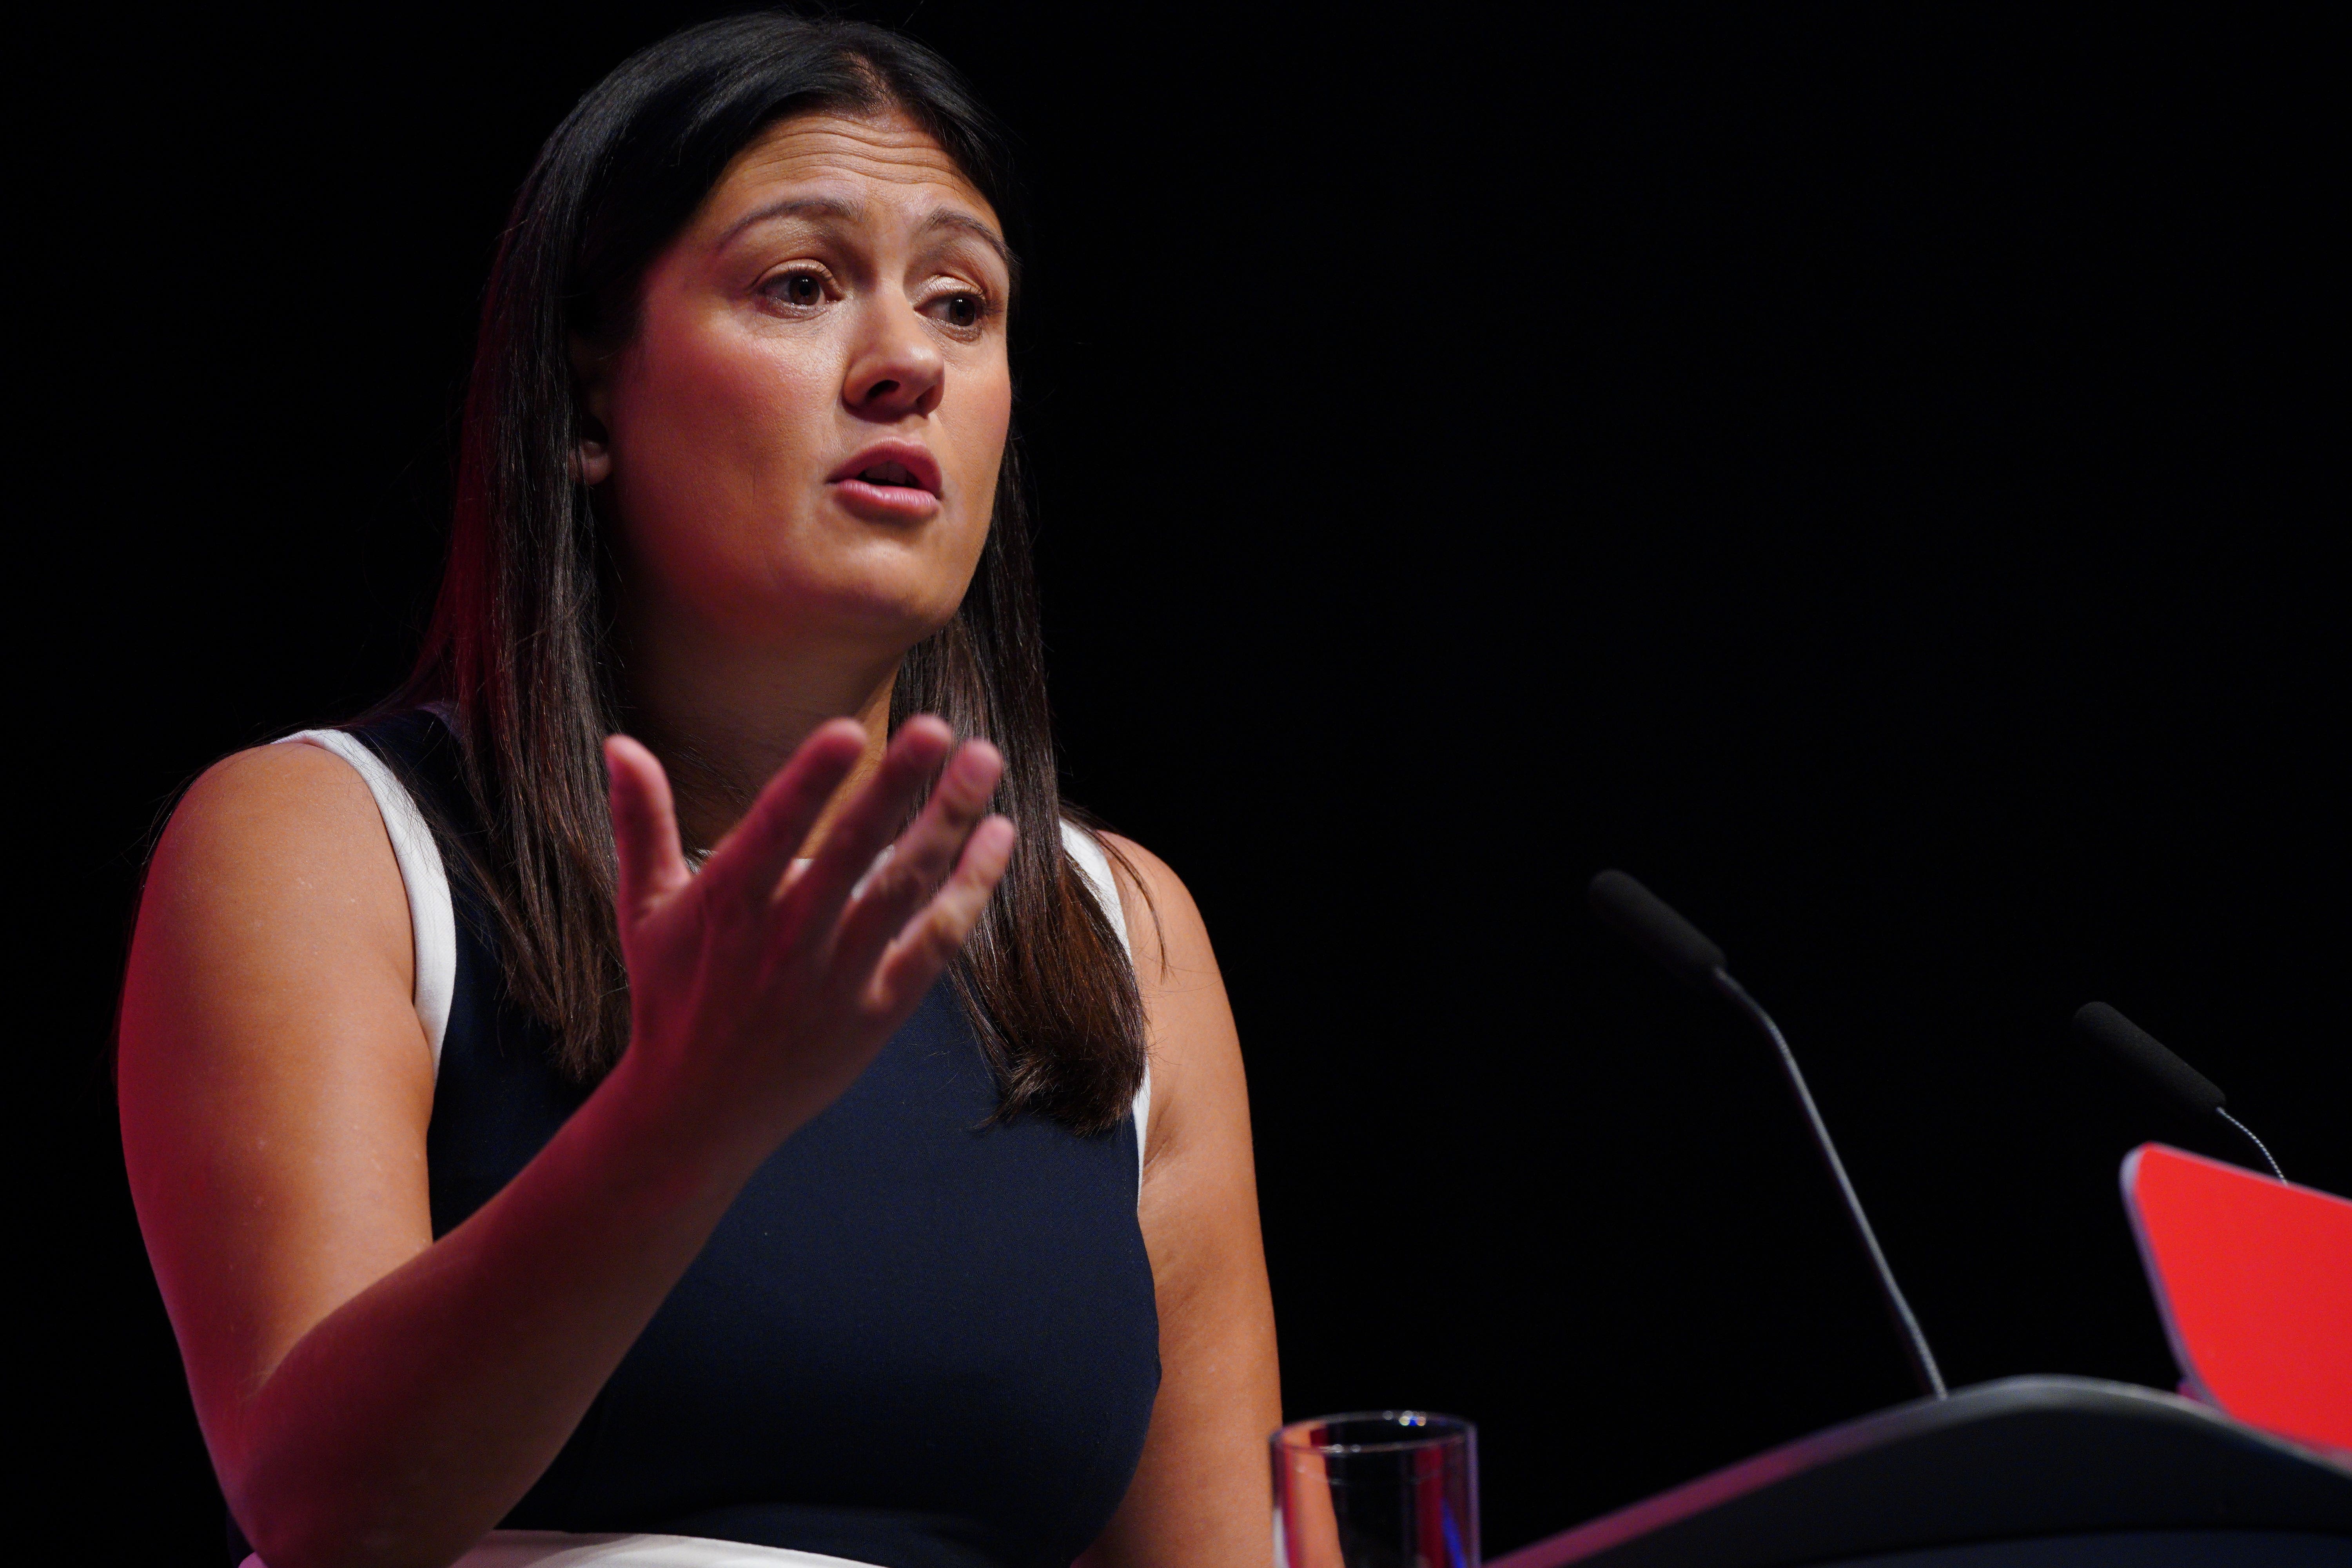 Former shadow housing secretary Lisa Nandy commissioned the report